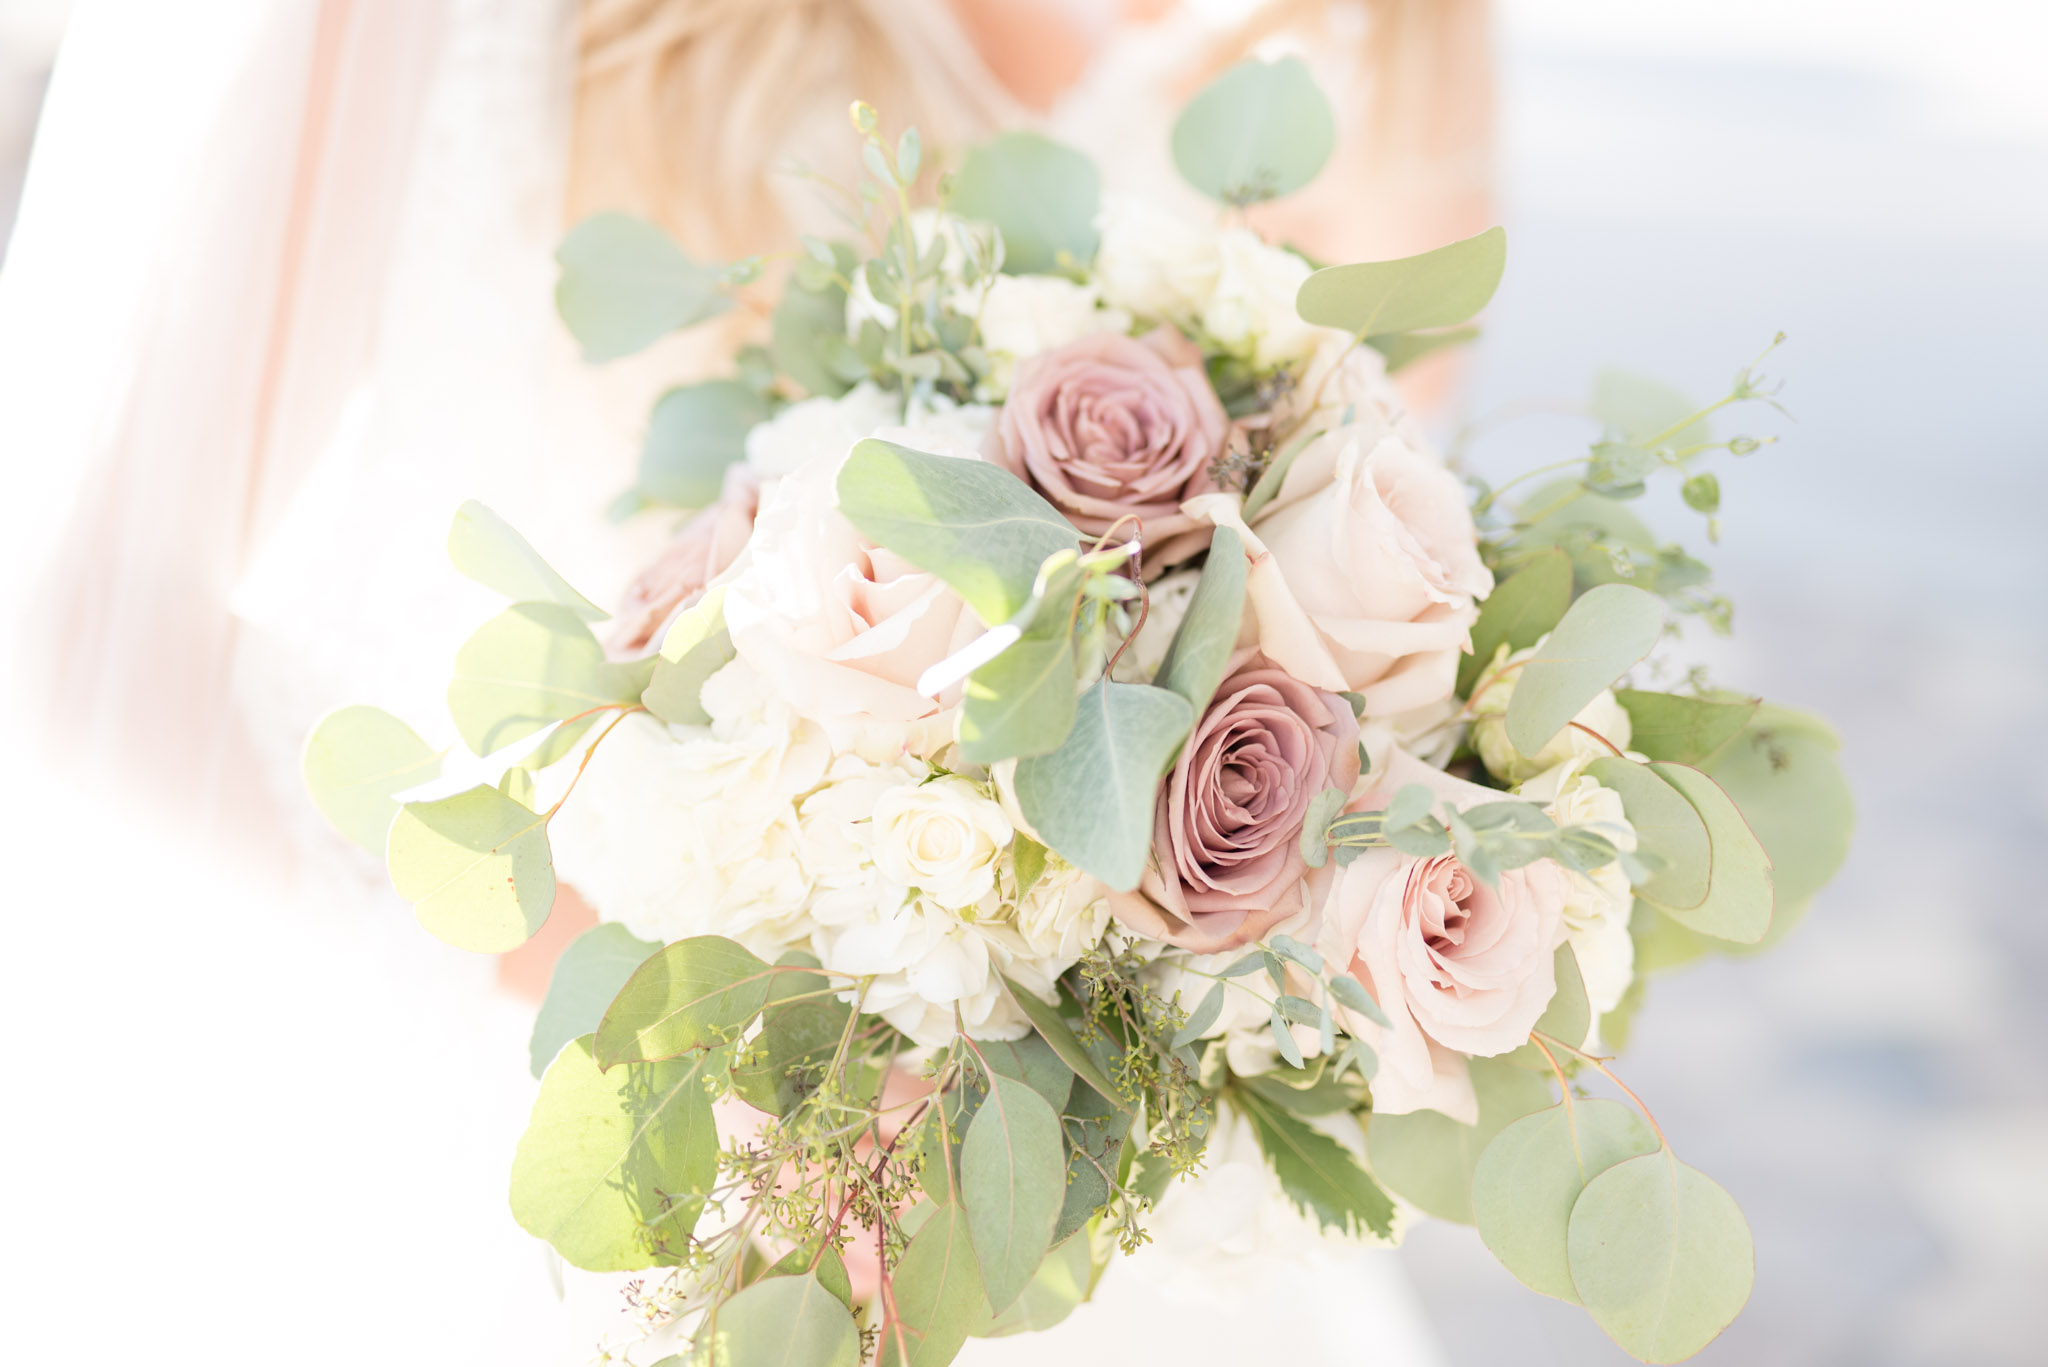 Blush and white bridal bouquet.